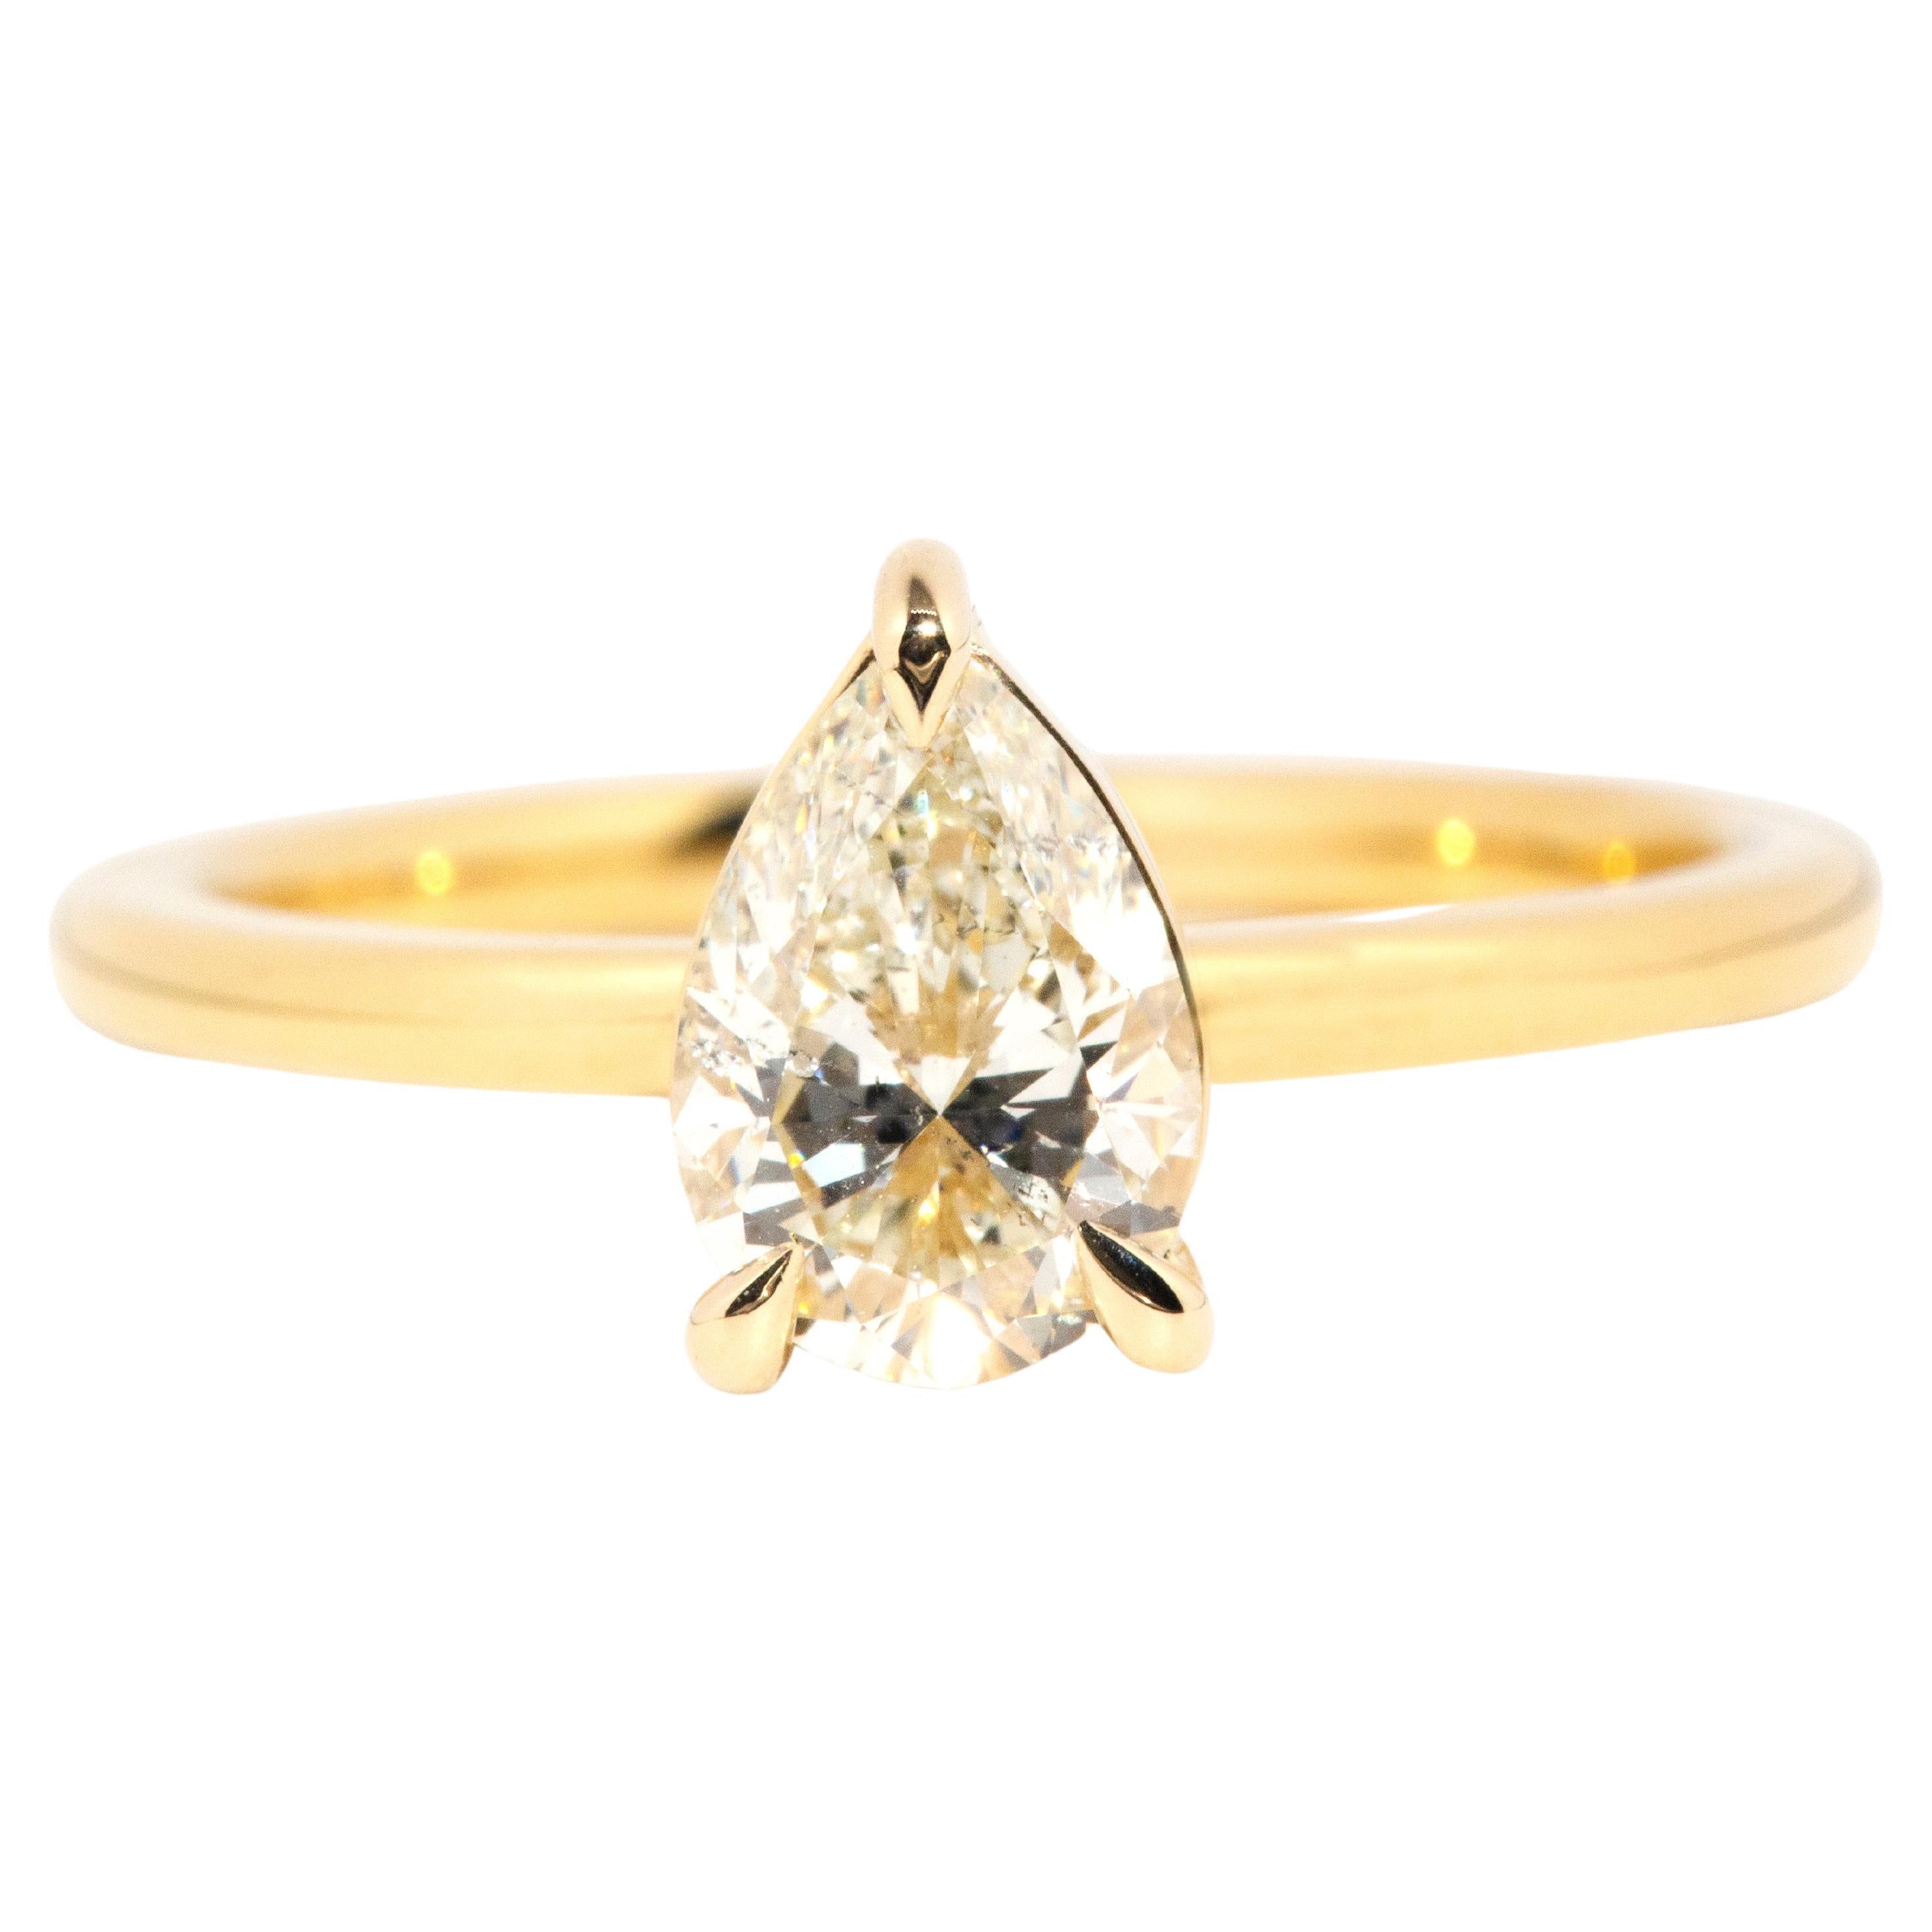 Handmade Contemporary 1.01 Carat Pear Cut IGI Certified Diamond Solitaire Ring For Sale